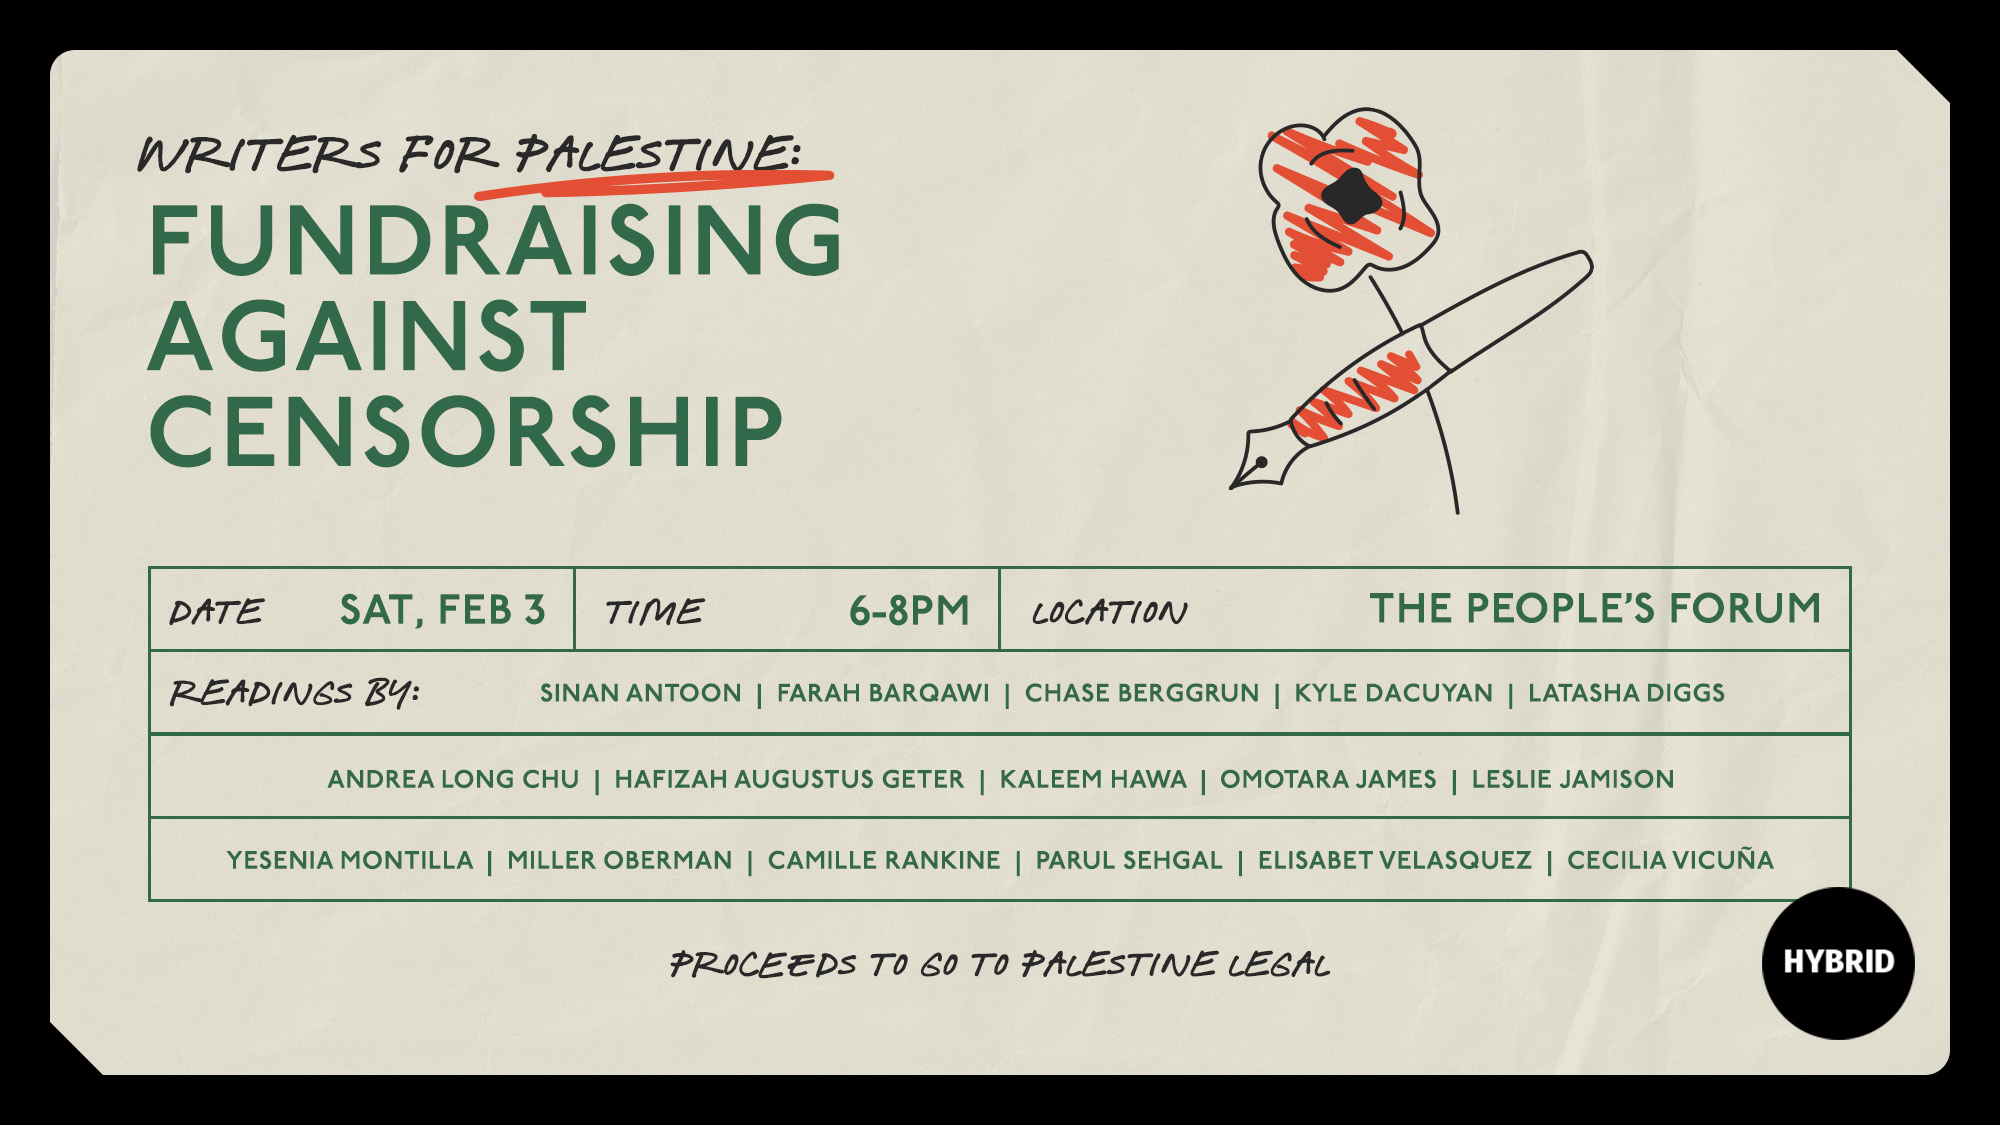 Tan background with green text: Writers for Palestine: Fundraising Against Censorship